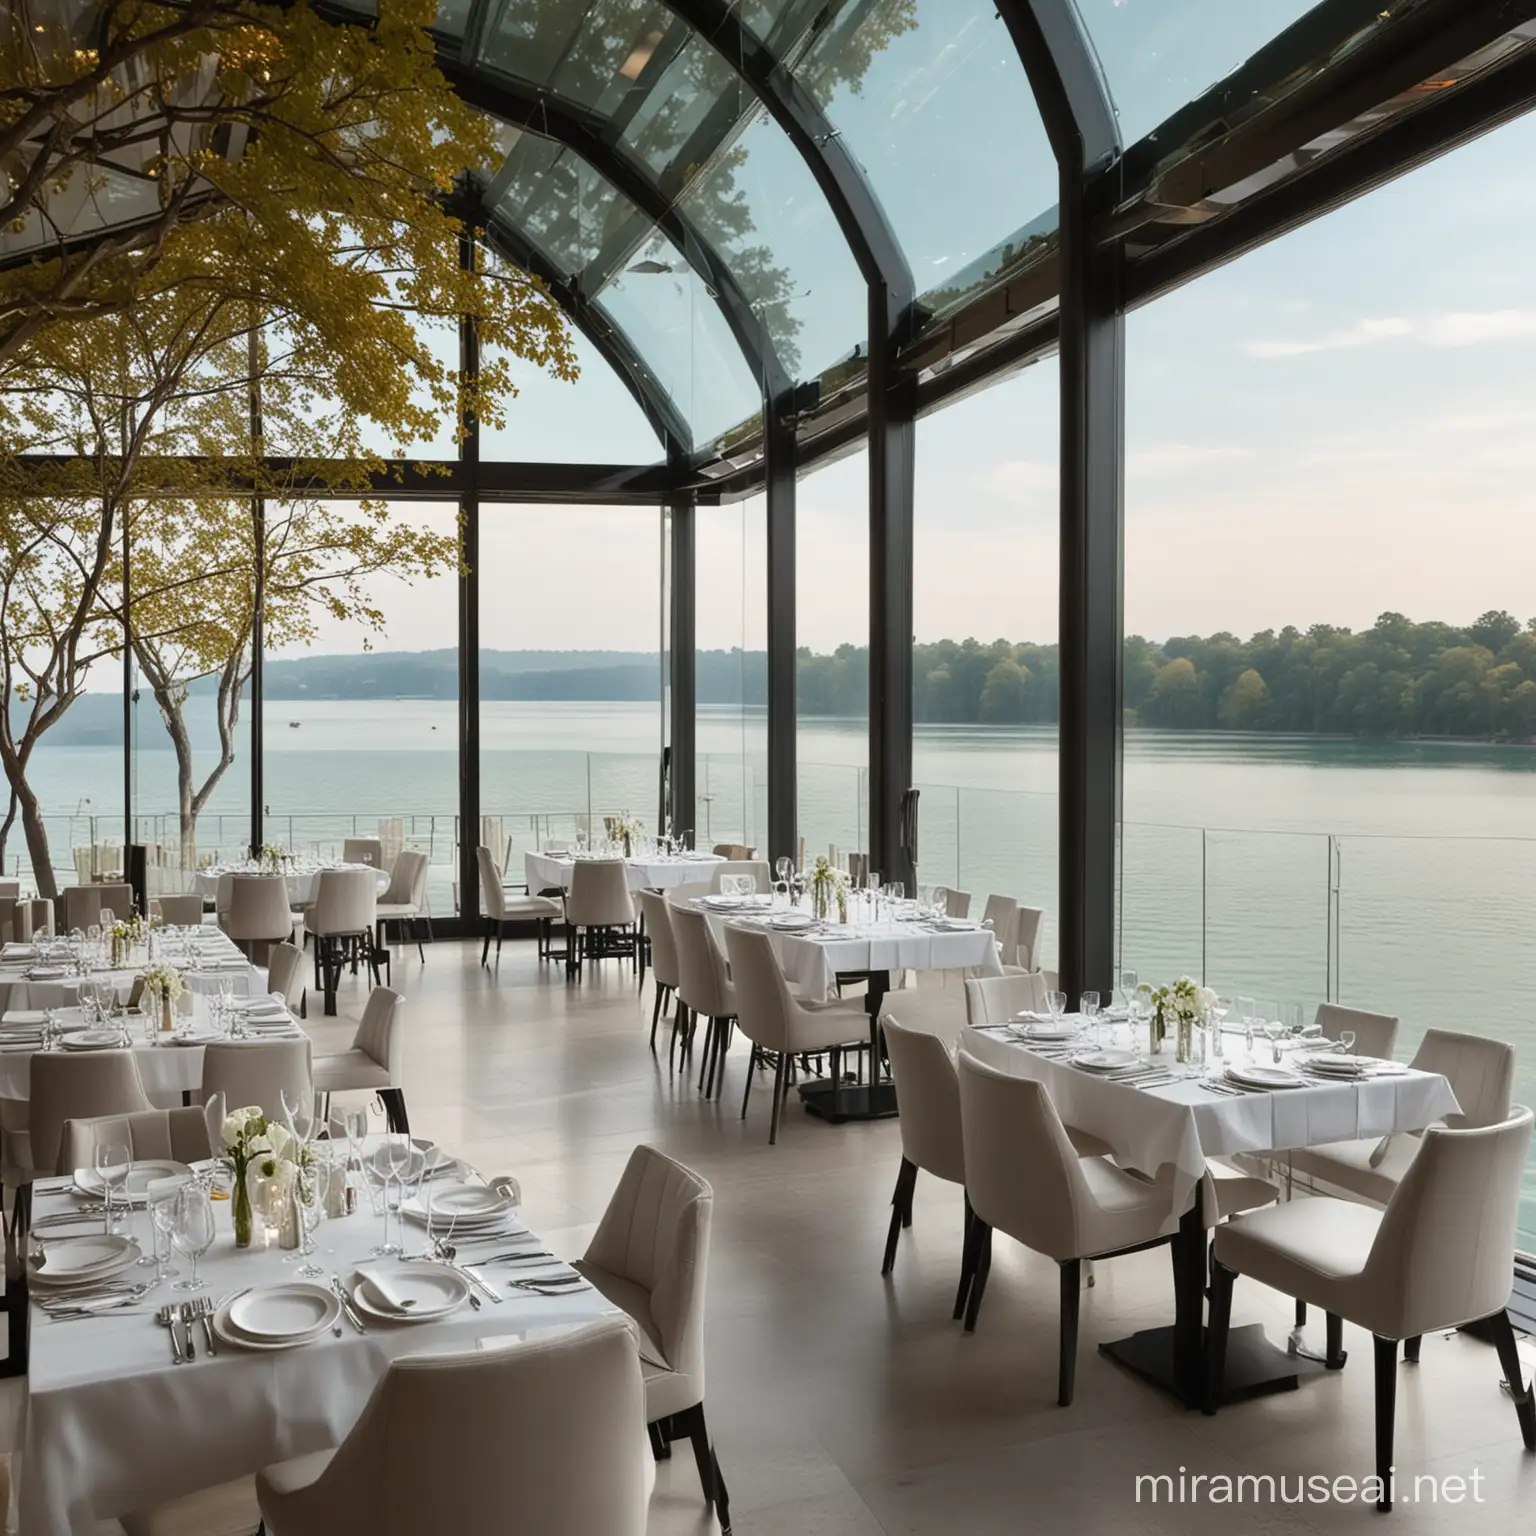 Imagine yourself in a world-class restaurant, elegantly adorned. Expansive glass walls showcase a breathtaking, unobstructed vista of a shimmering lake. Crystal-clear water stretches as far as the eye can see, with minimal trees to mar the panoramic view. The superstructure's architecture complements the scene – perhaps sleek metallic beams frame the lake-scape visible through the glass. It's a truly immersive dining experience, seamlessly blending luxury with the beauty of nature.